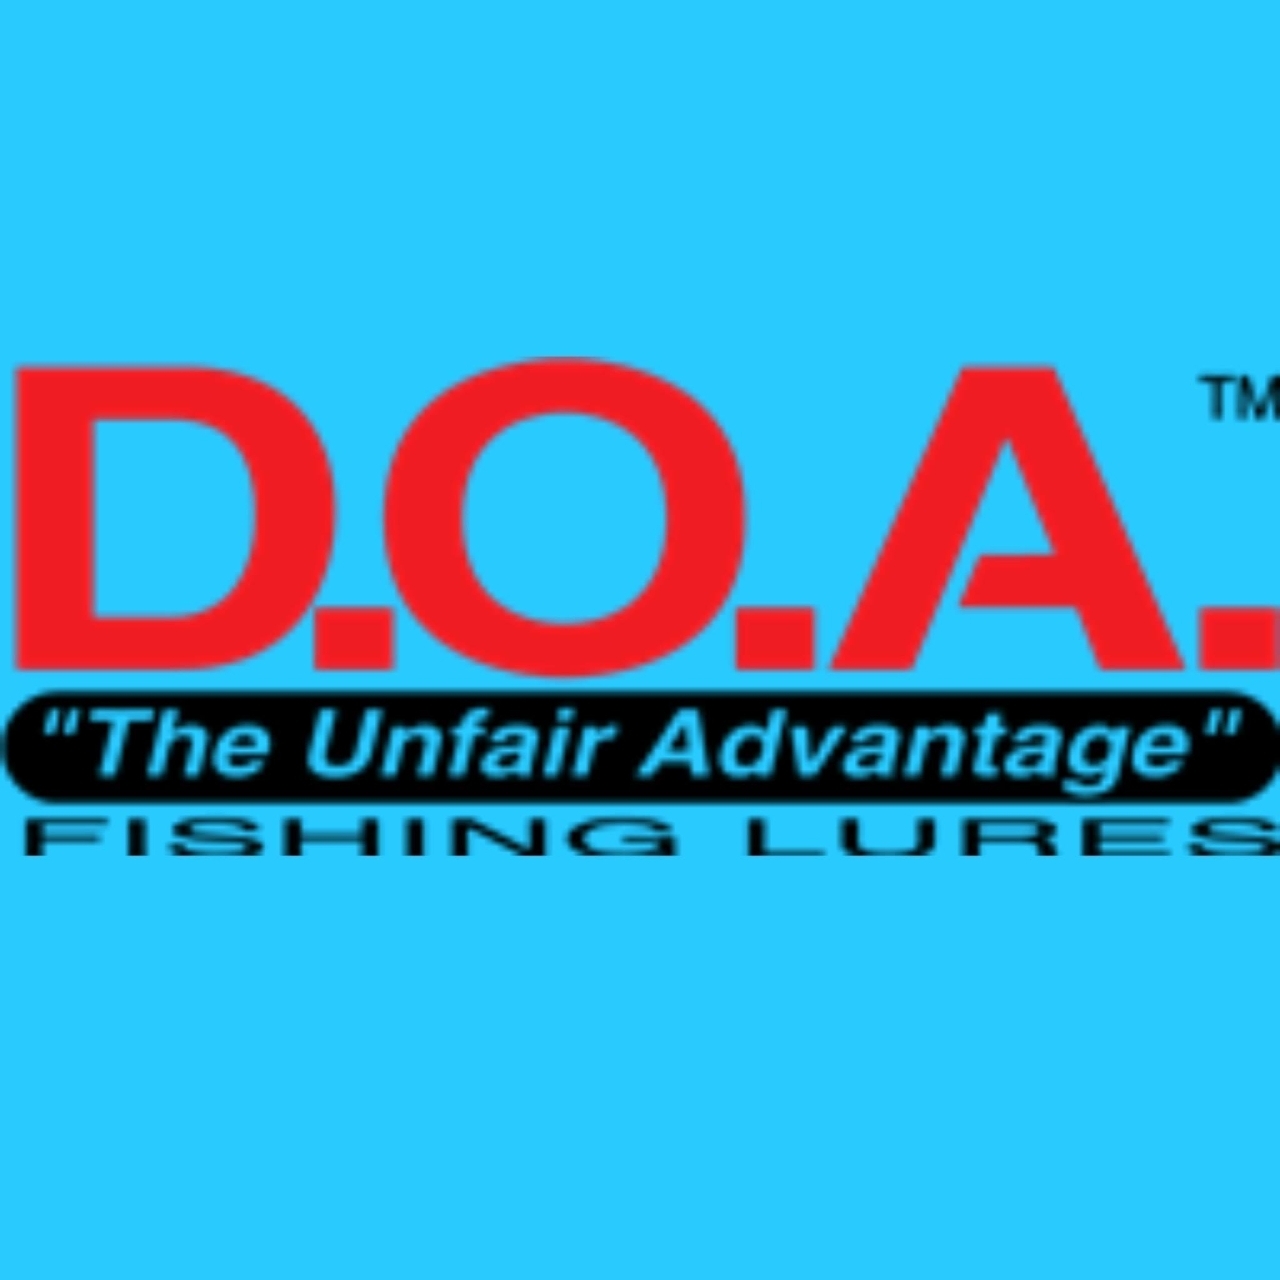 D.O.A. Fishing Lures